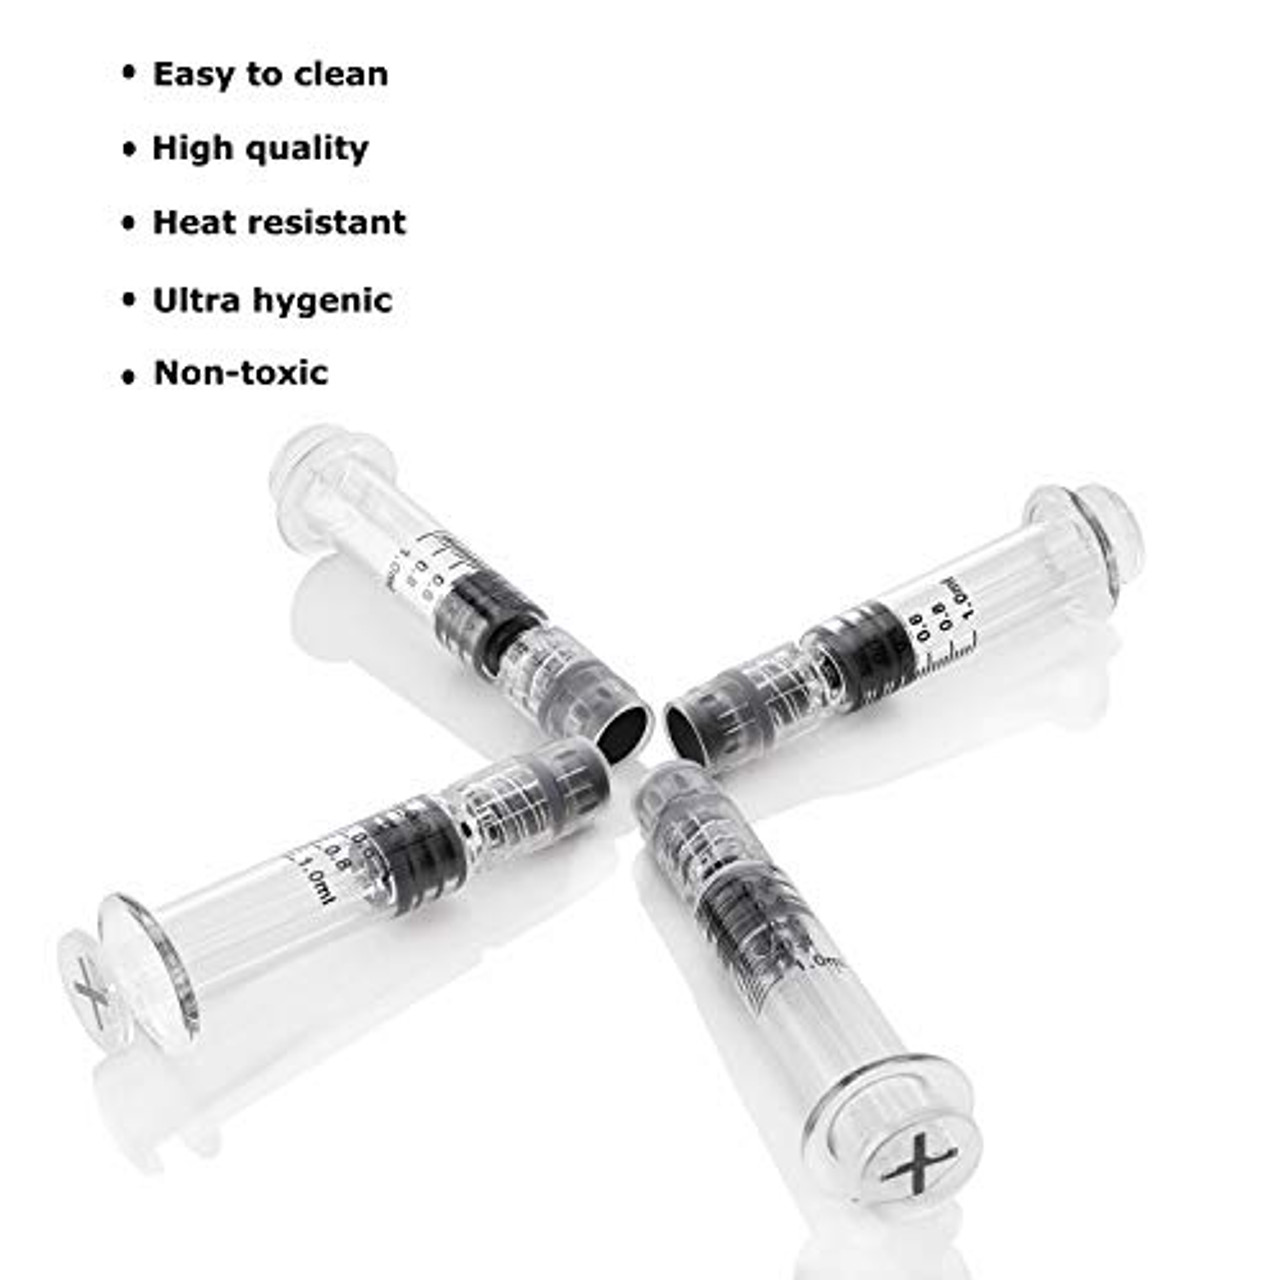 100 Pack Borosilicate Glass Luer Lock Syringe - 1ml Capacity Reusable, Heat  Resistant Tube for Labs - Use for Thick Liquids, Glue, Lab, Ink - with